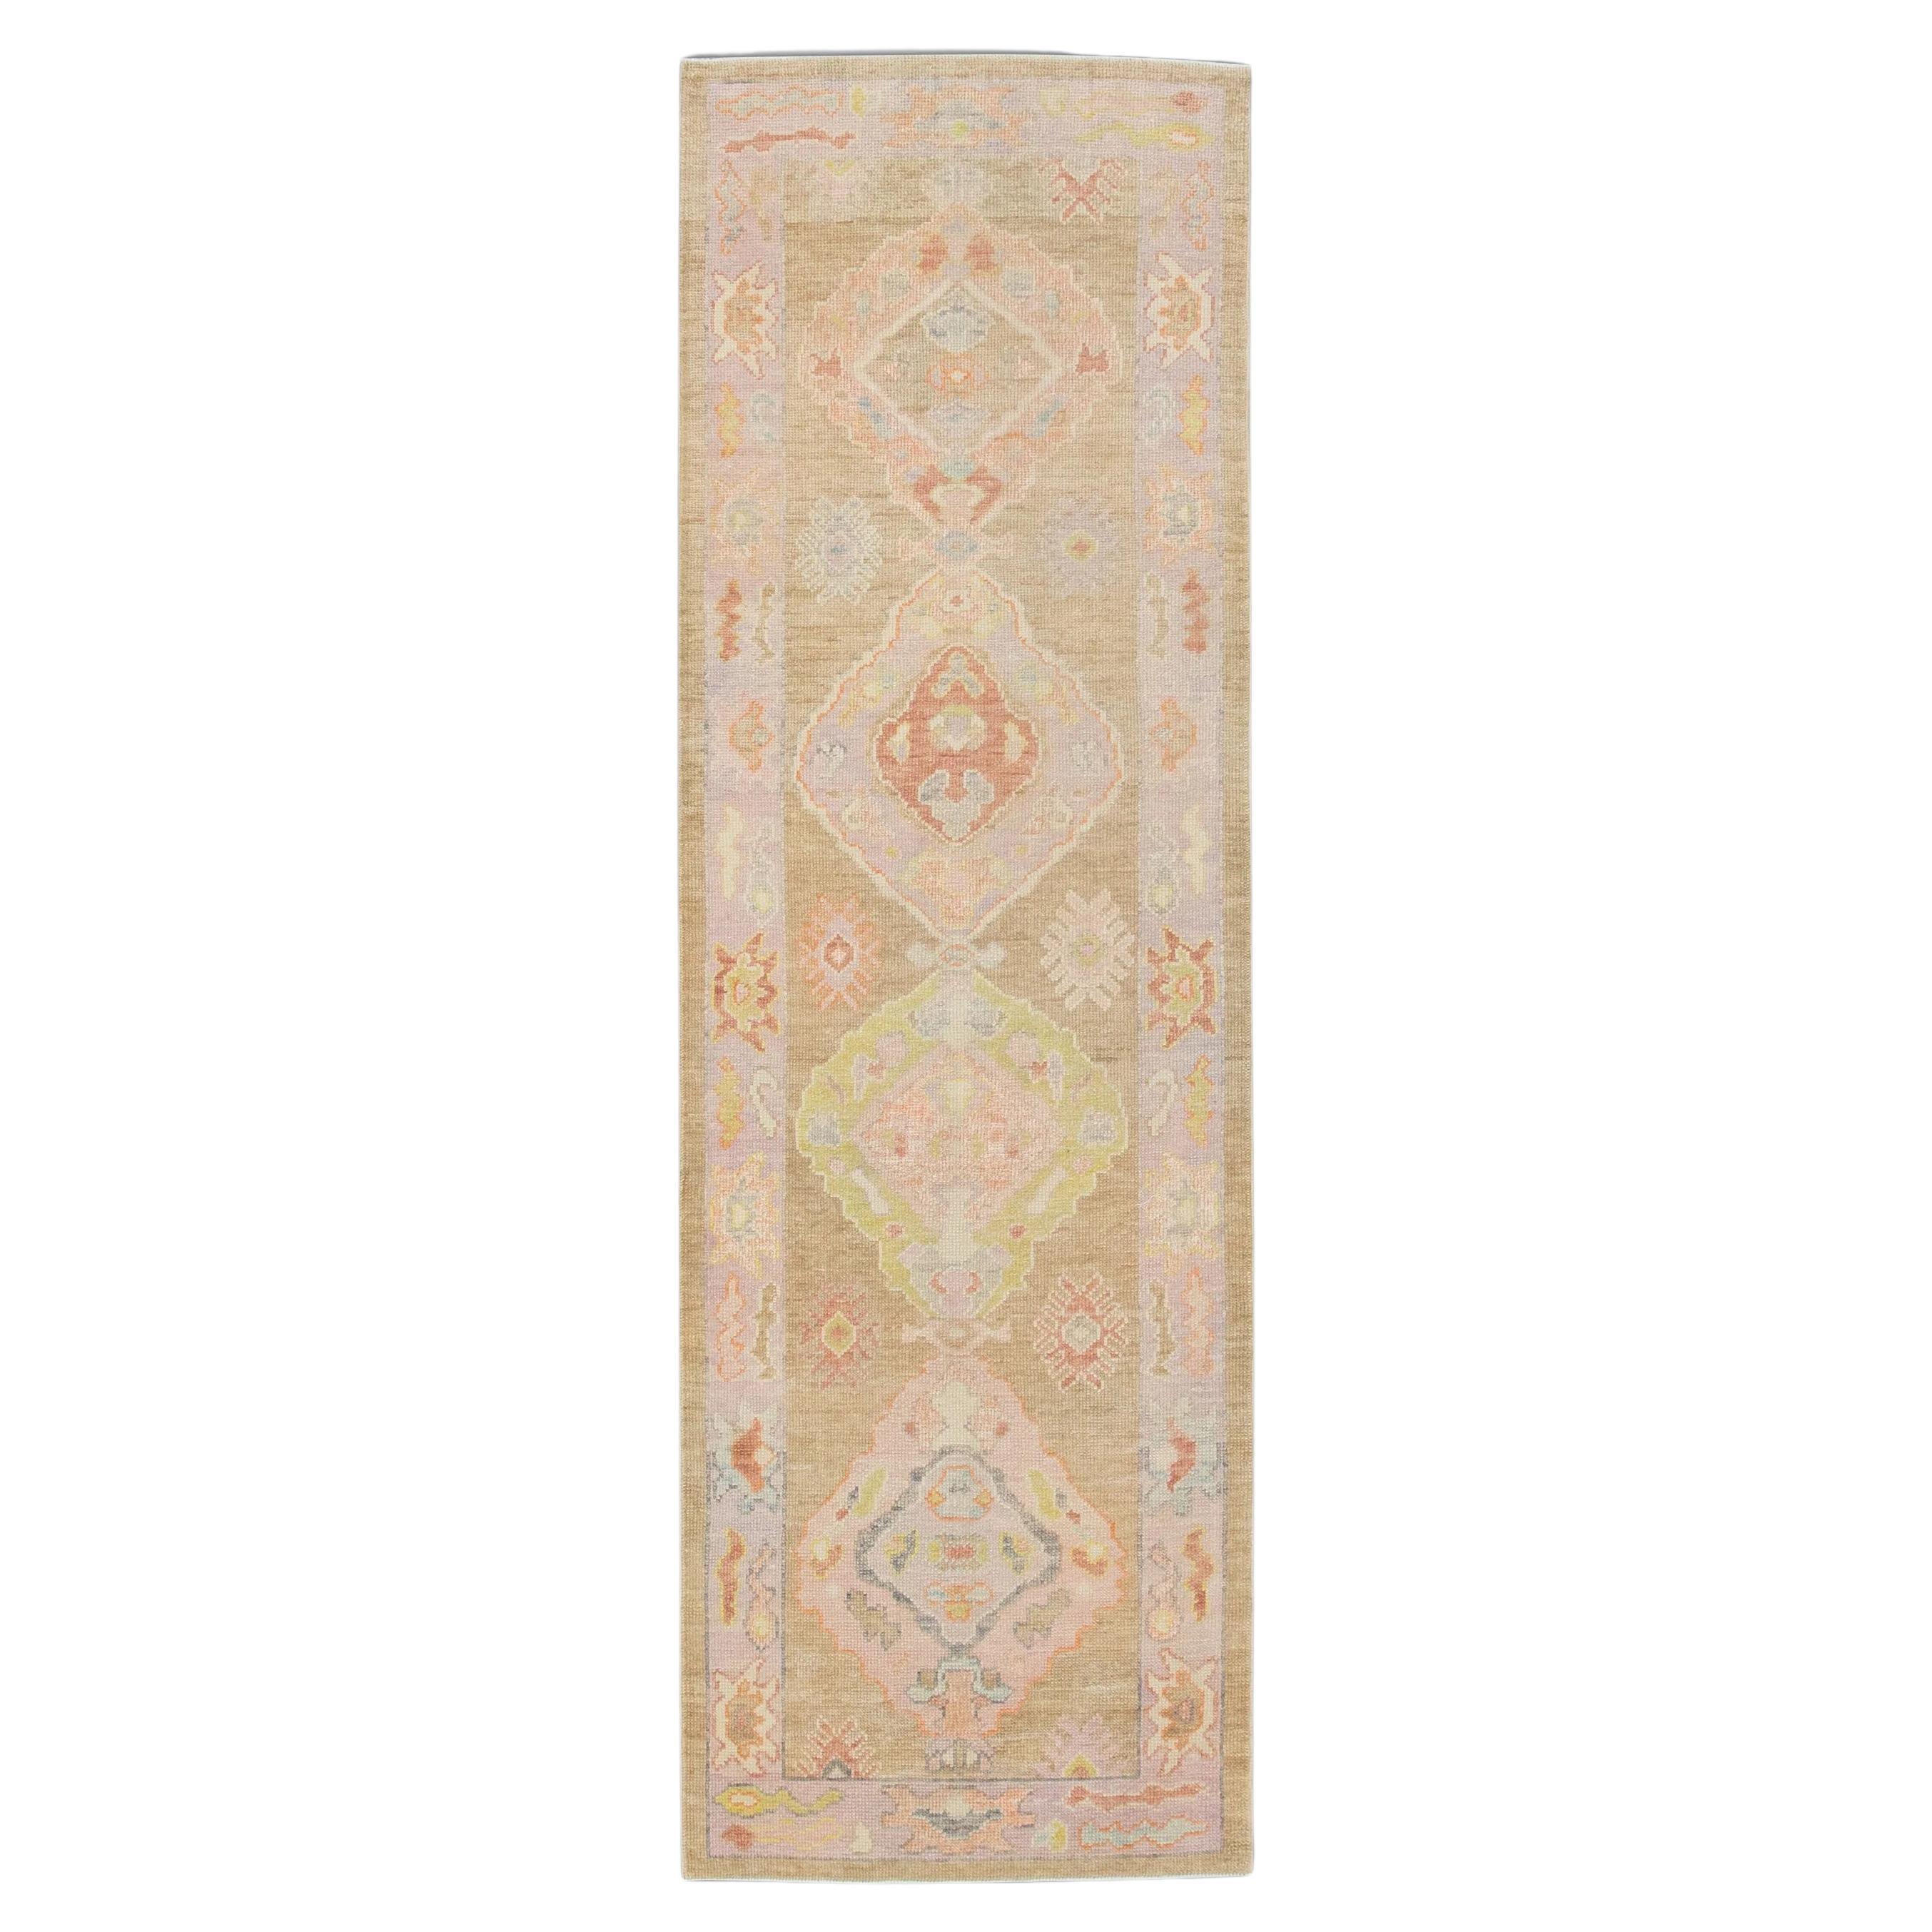 Colorful Handwoven Wool Turkish Oushak Rug with Pink Floral Design 3' x 9'6" For Sale